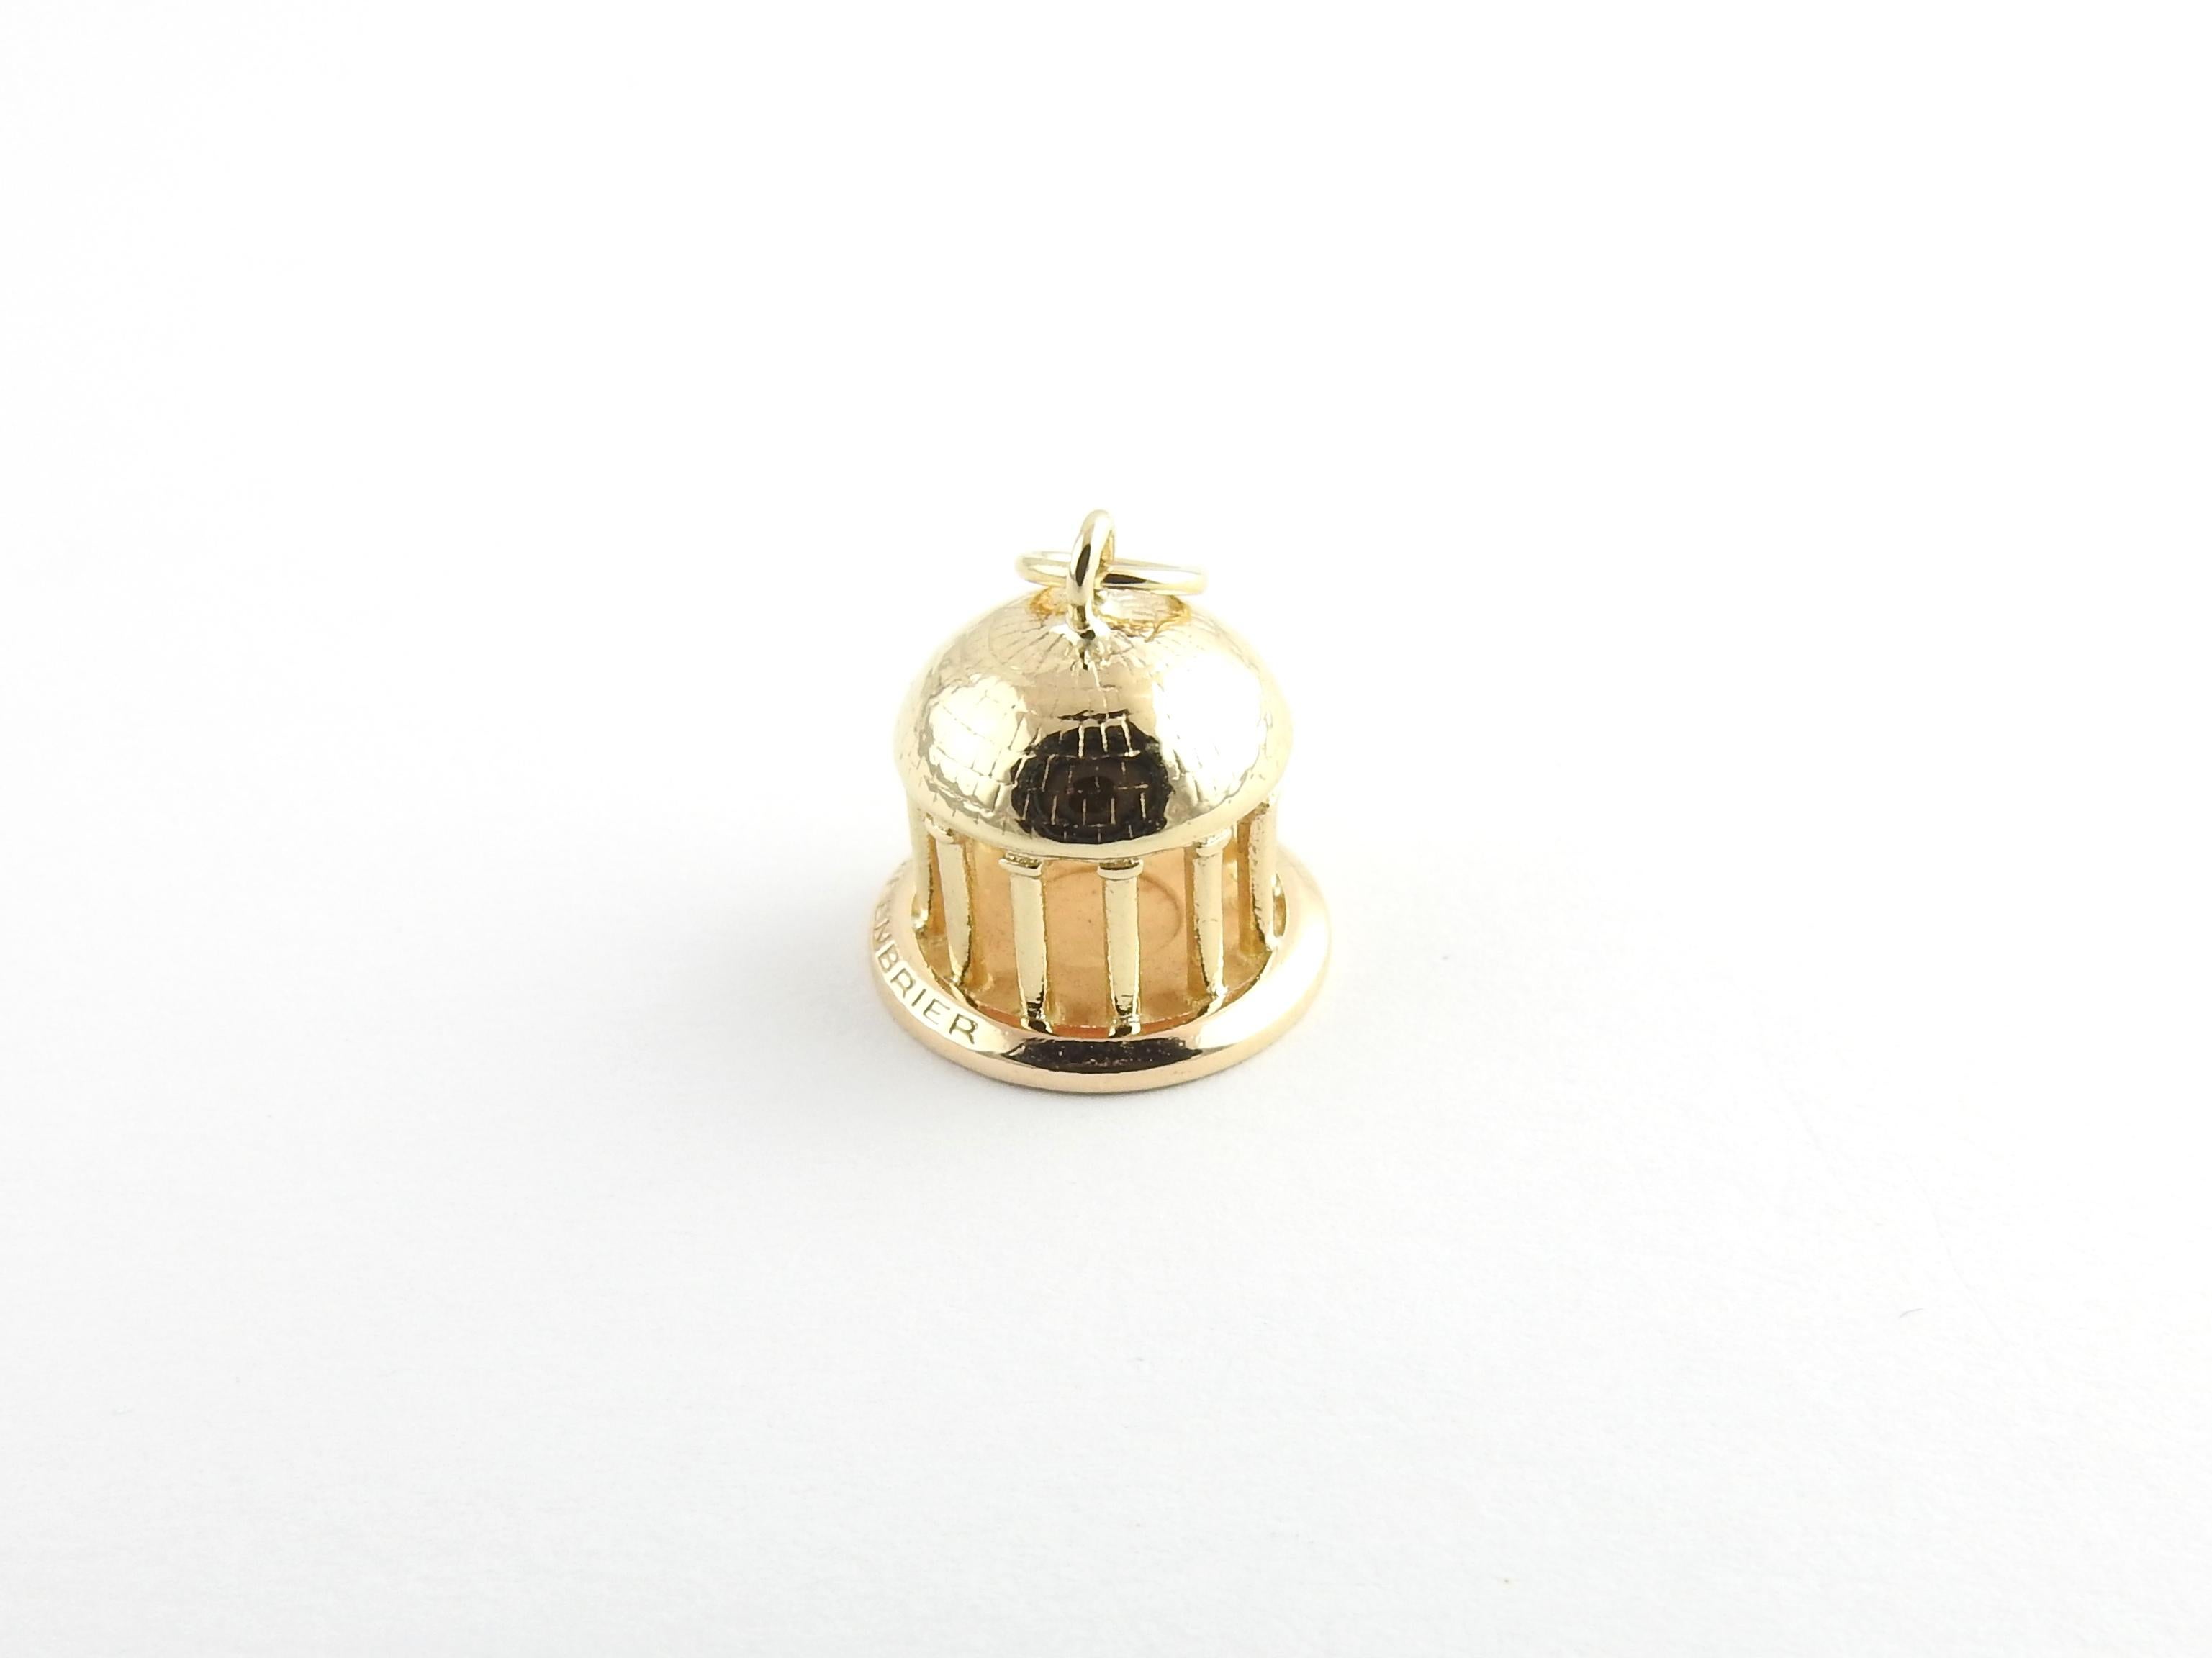 Vintage 14 Karat Yellow Gold Greenbrier Dome Charm

Located in the Allegheny mountains of West Virginia, the Greenbrier resort is a national historical landmark.

This lovely 3D charm features the historical dome meticulously detailed in 14K yellow